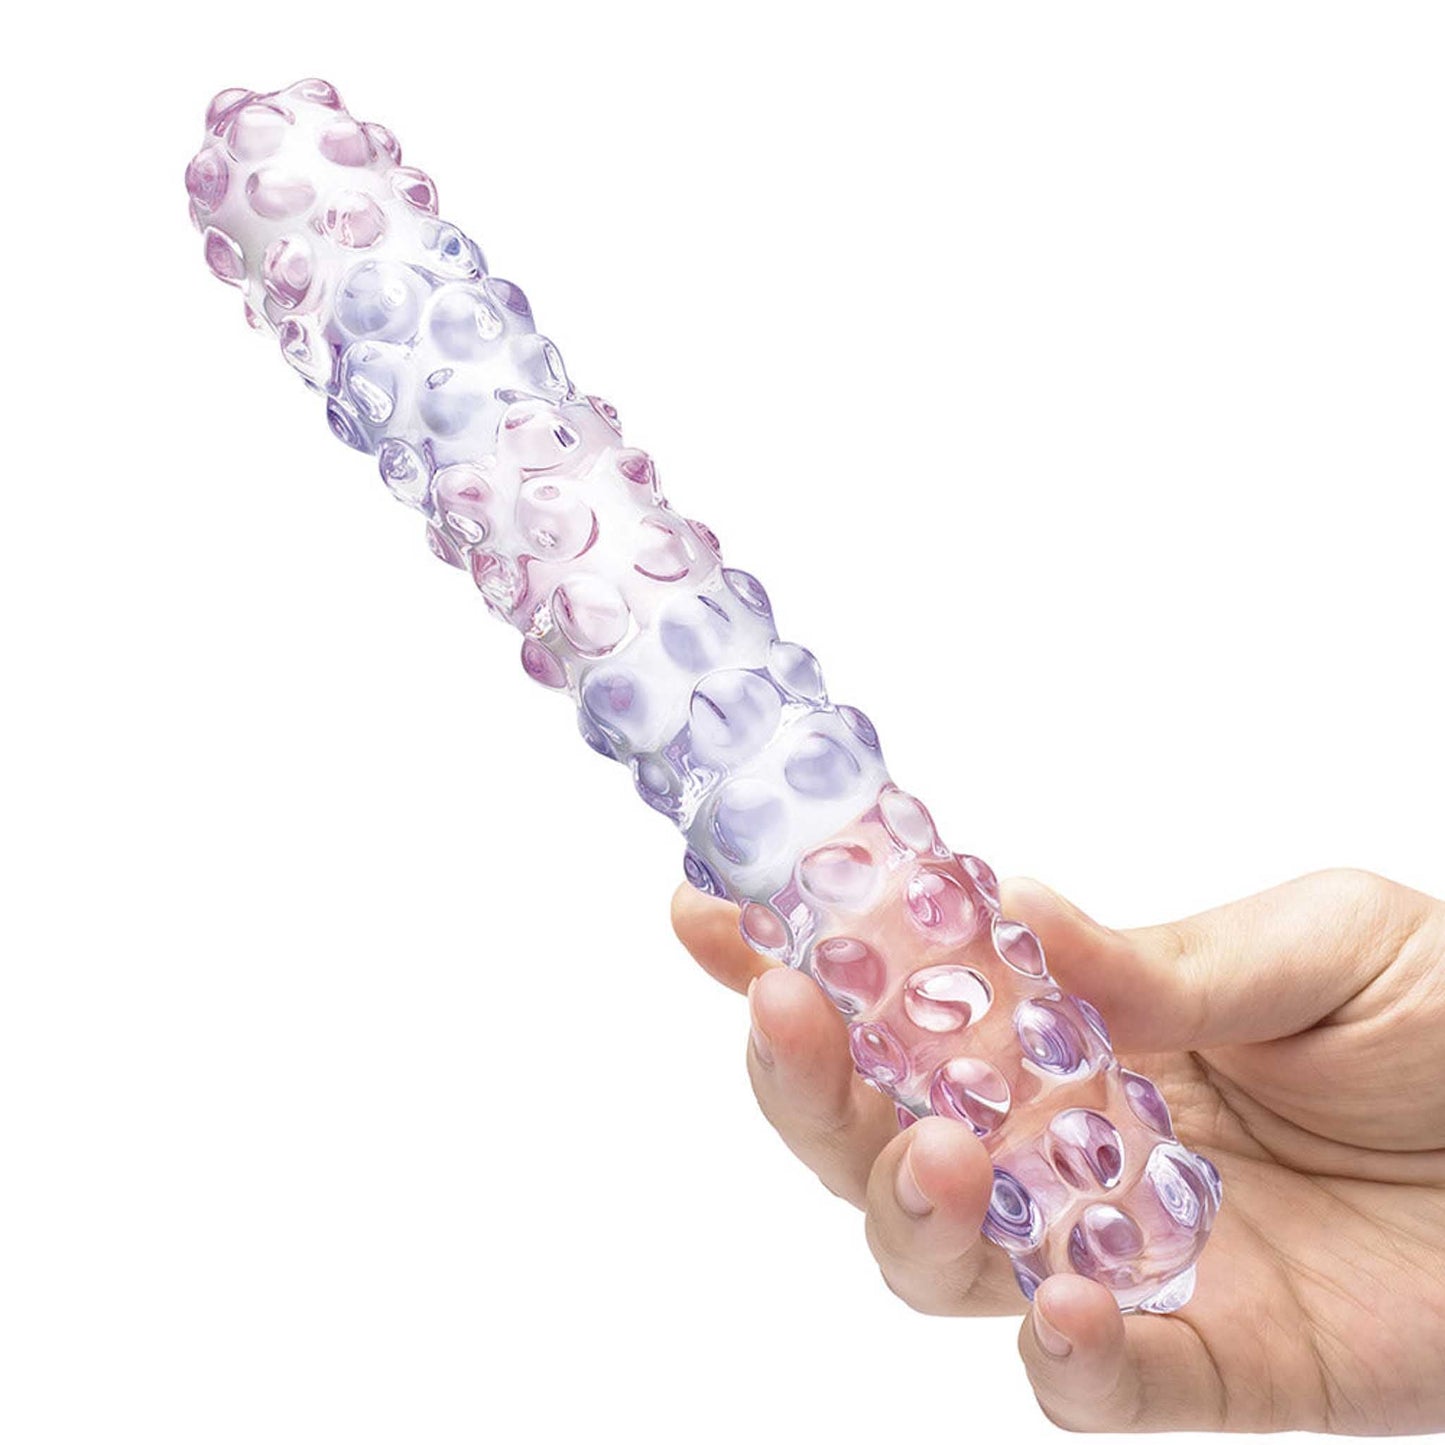 Glas Purple Rose Glass Nubby Dildo 9in - Clear/Pink